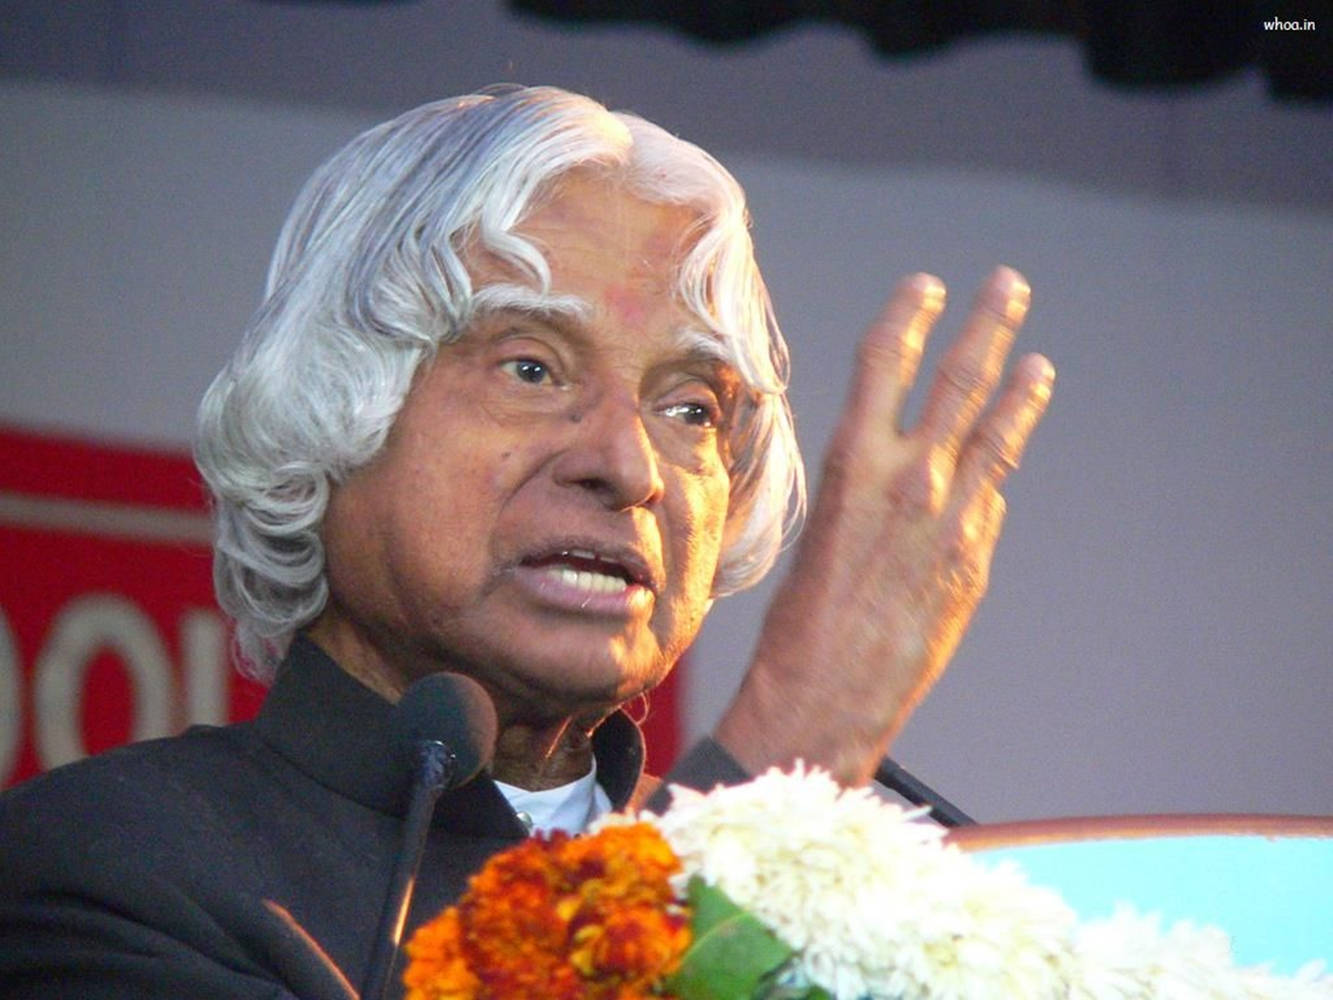 Dr. Abdul Kalam During One Of His Inspiring Lectures